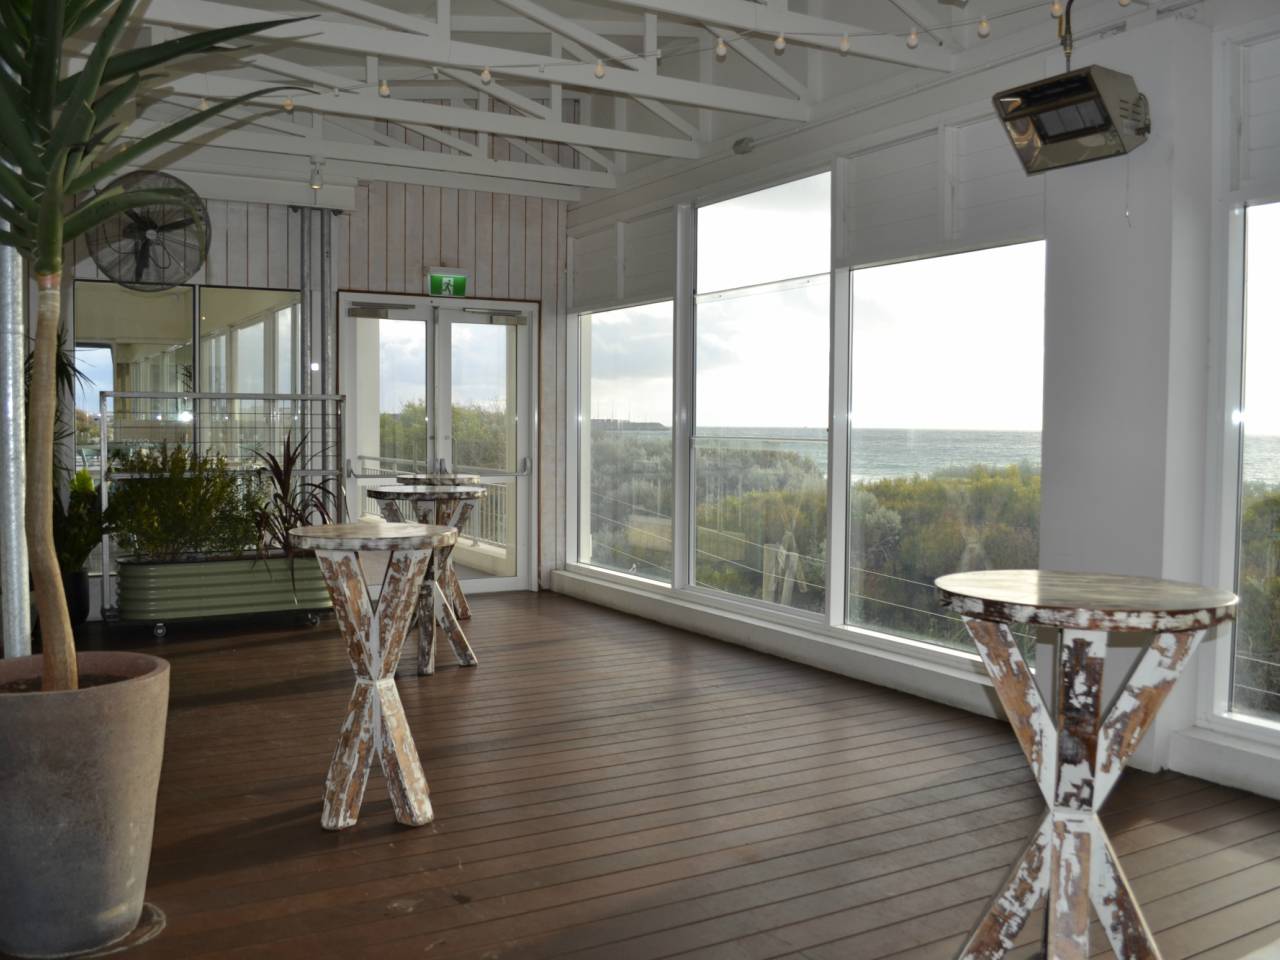 Private Function Area Set Up For Drinks And Has A View Of The Ocean. Coast Port Beach